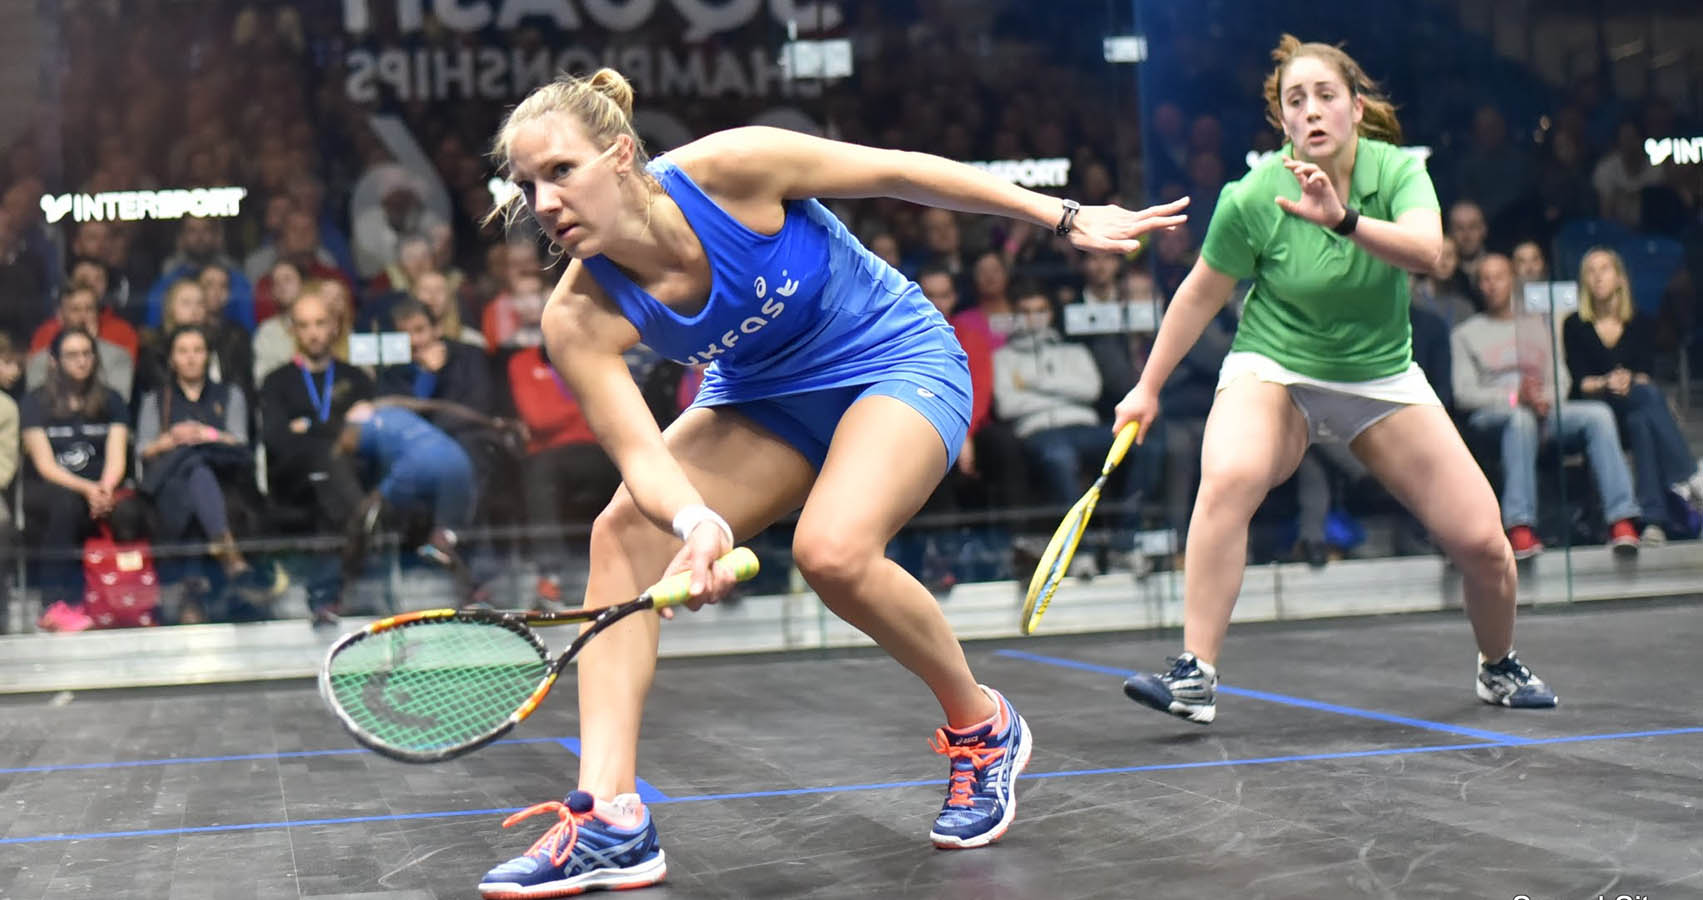 Laura Massaro is the favourite to win a fourth title at the National Squash Championships